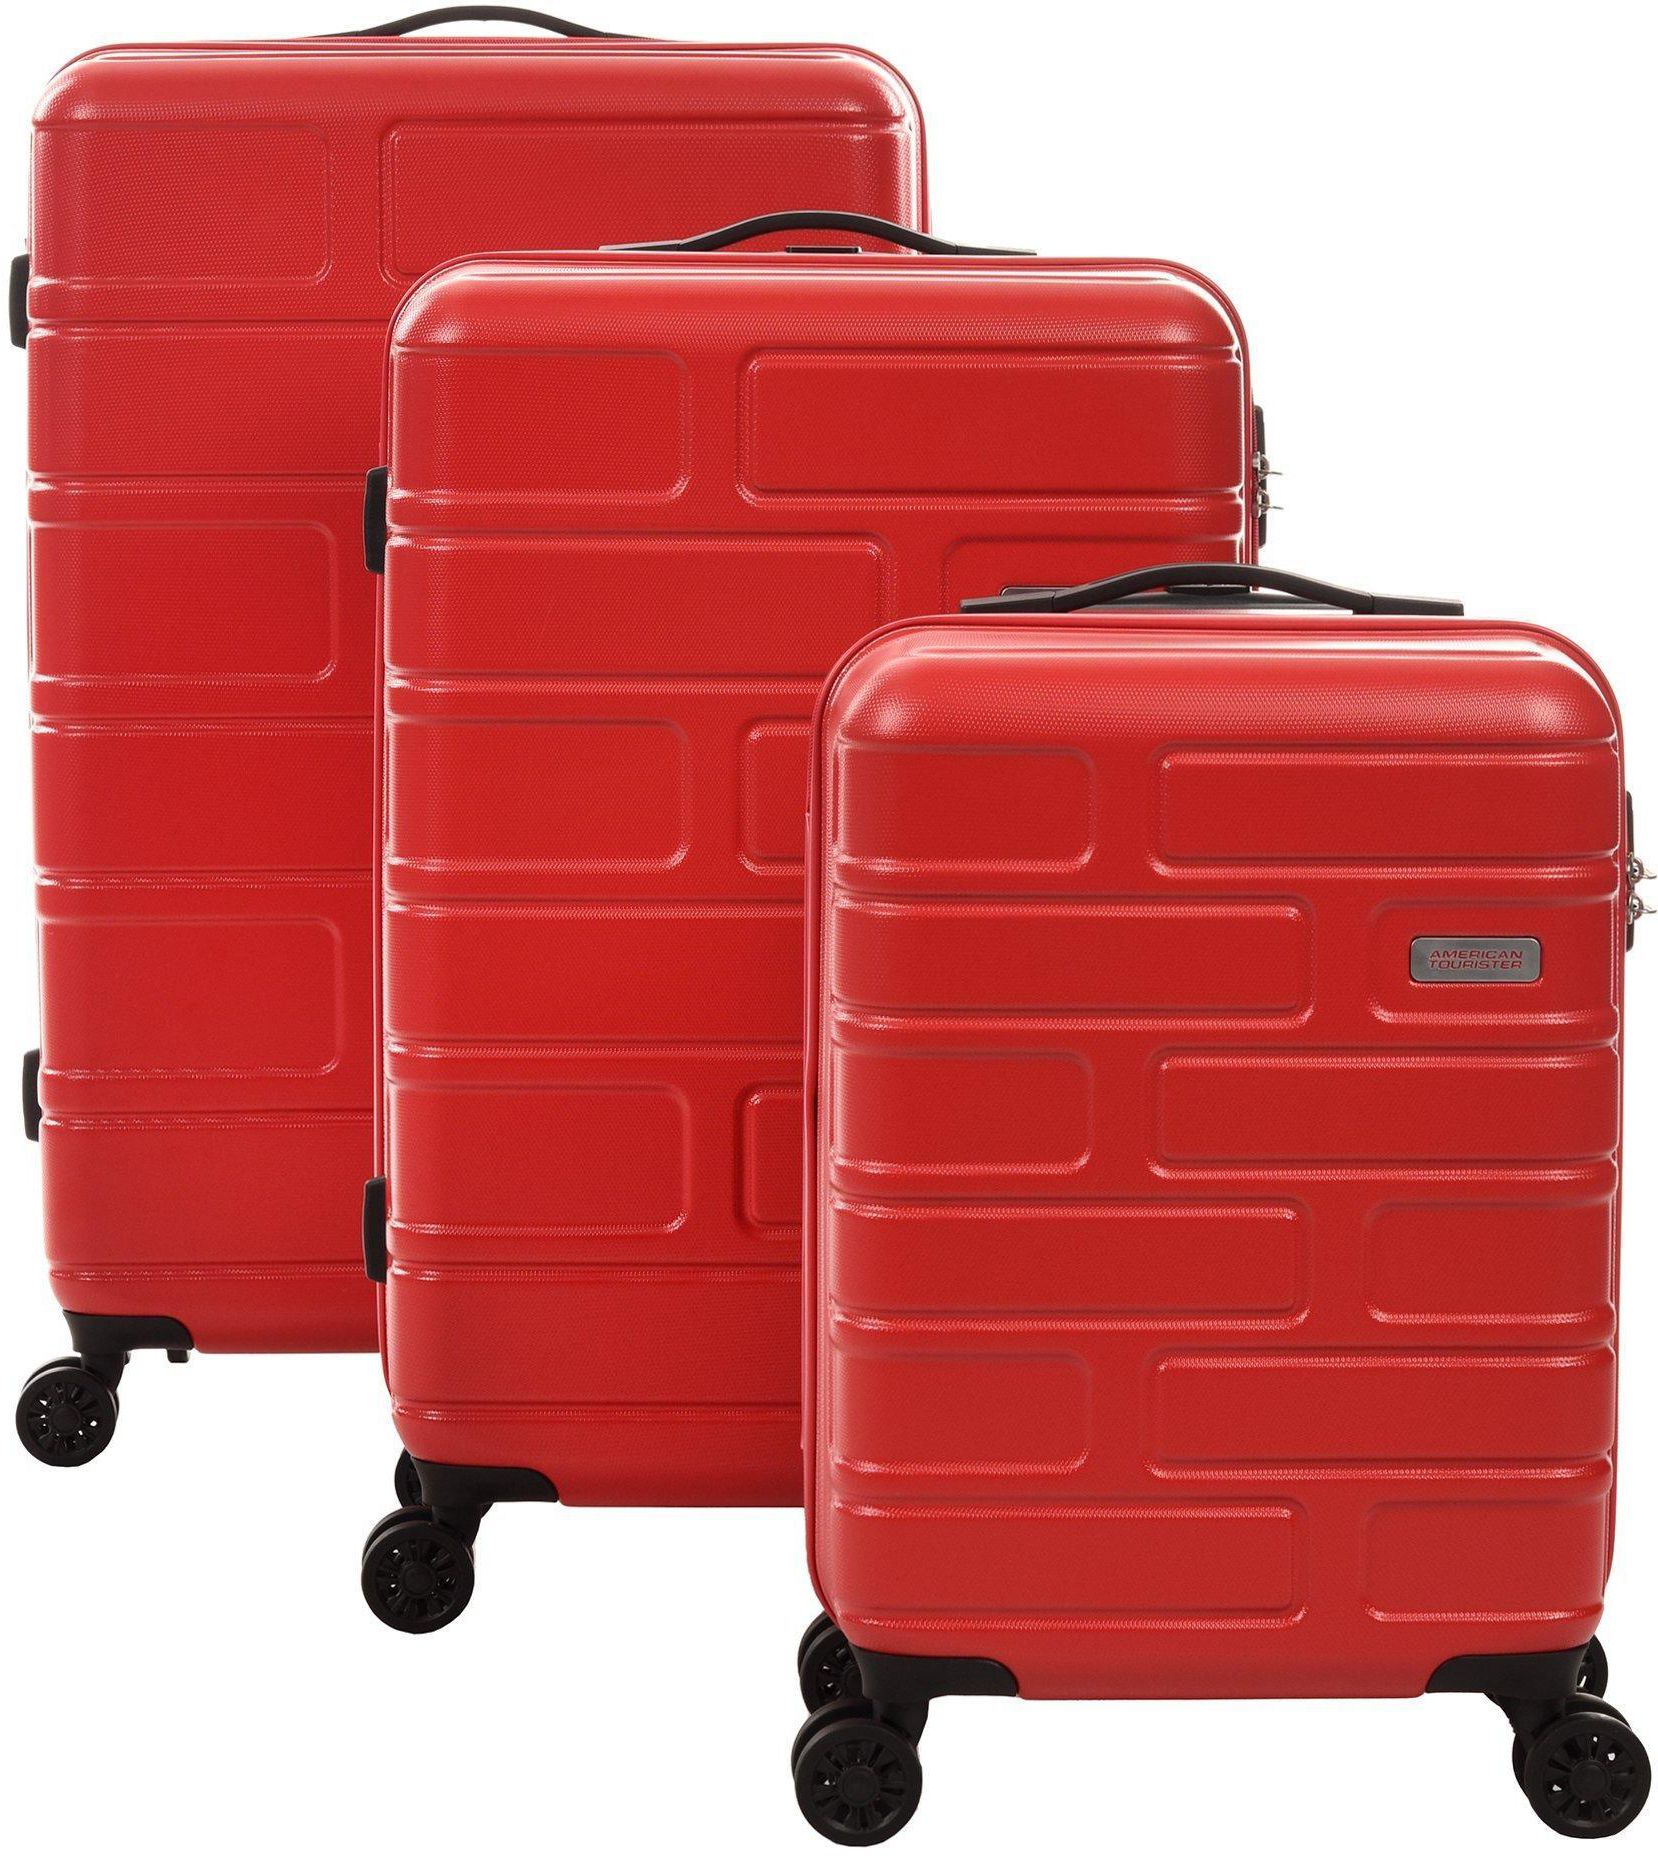 American Tourister Bricklane Set of 3Pc ABS Hard Luggage, 20/25/30 Inch, Red